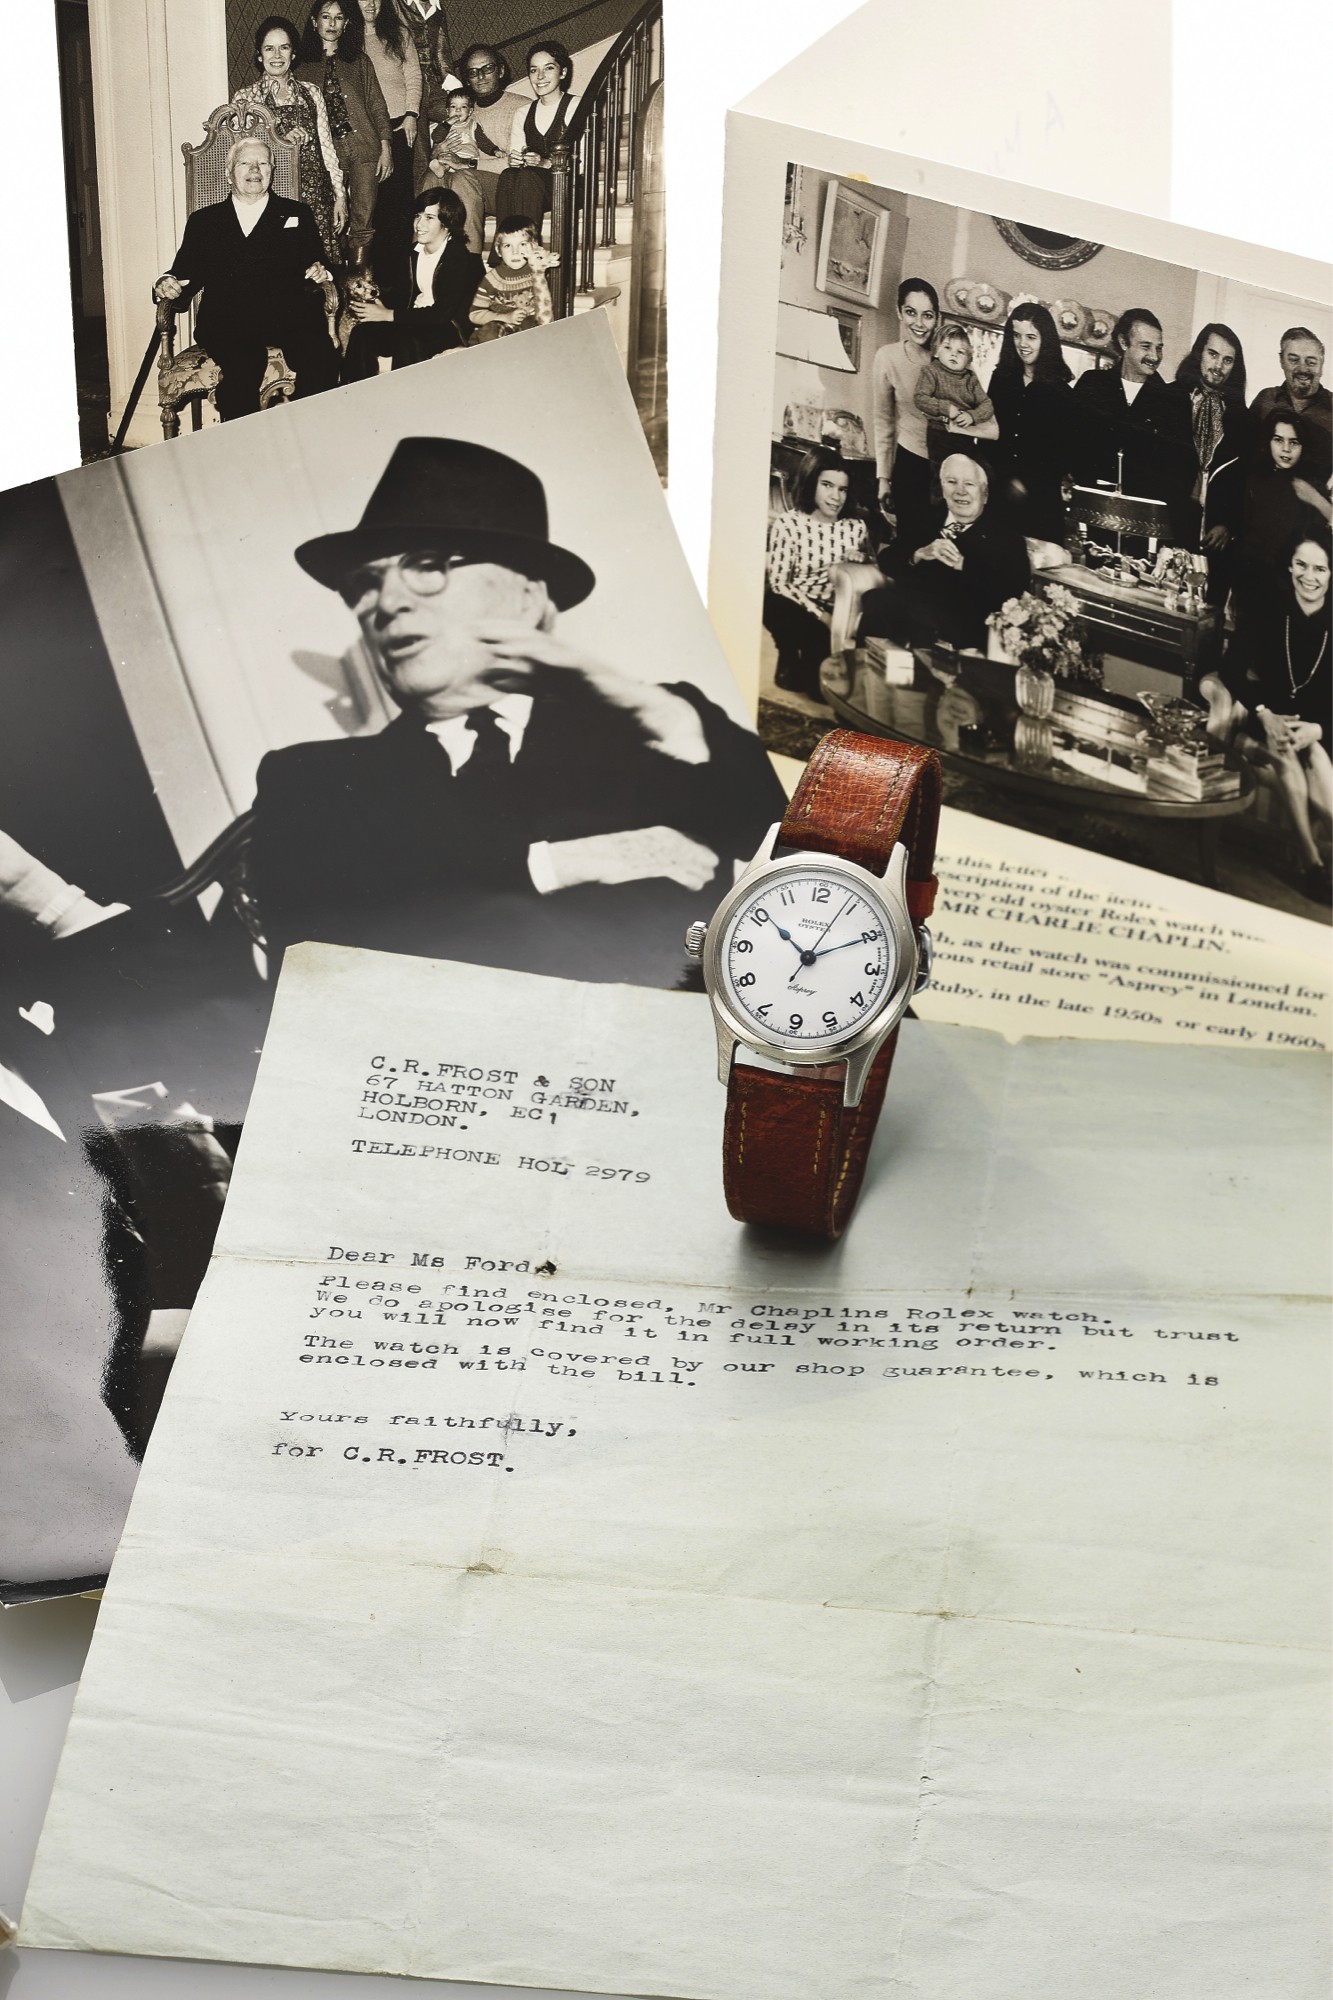 Charlie Chaplin’s Rolex Oyster, made in about 1945, attracted huge interest when it was sold at auction in 2013 for US$51,250.